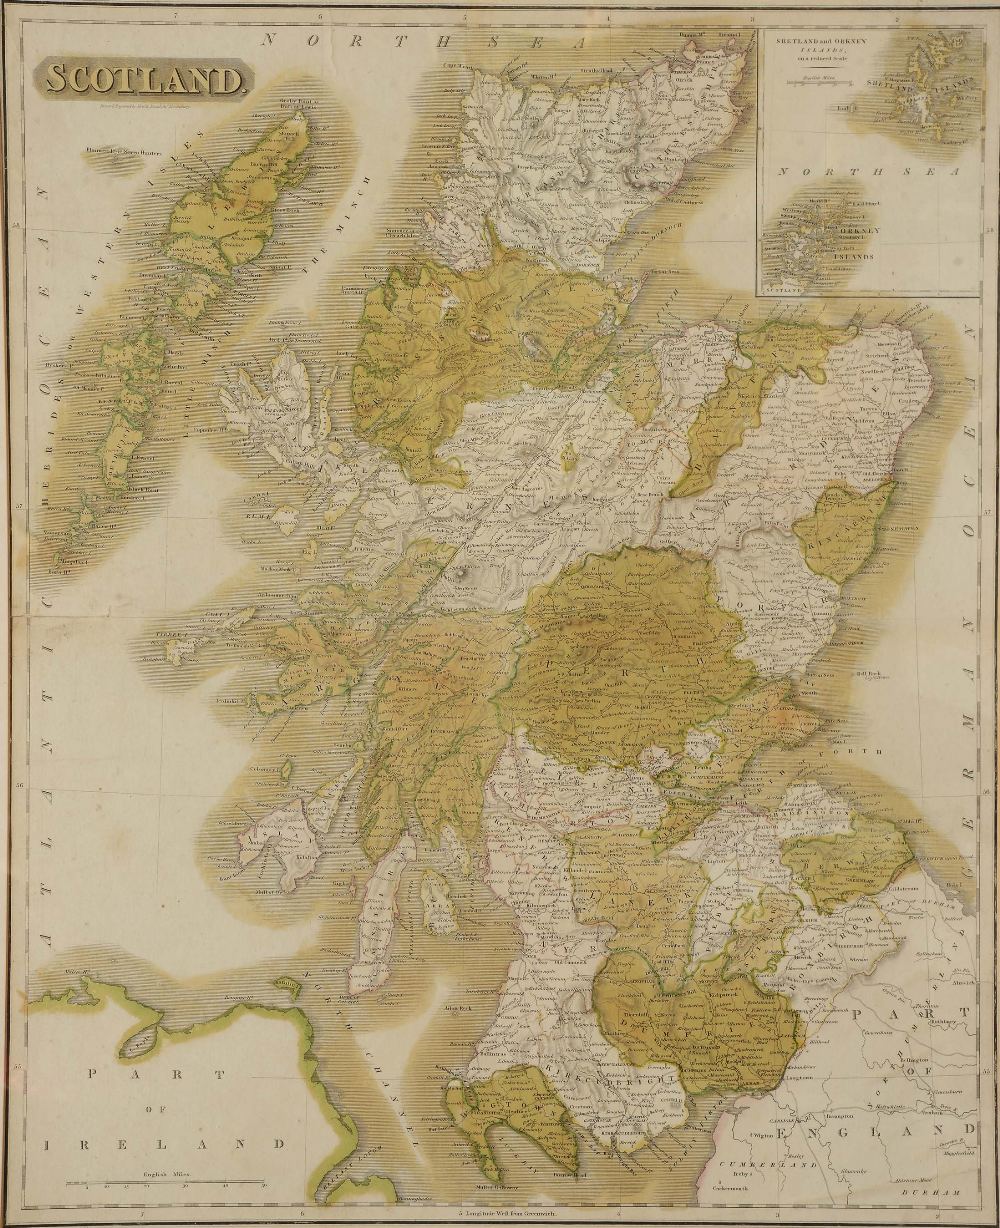 A 19TH CENTURY ENGRAVED MAP of Scotland, drawn and engraved for Thomson's New General Atlas c.